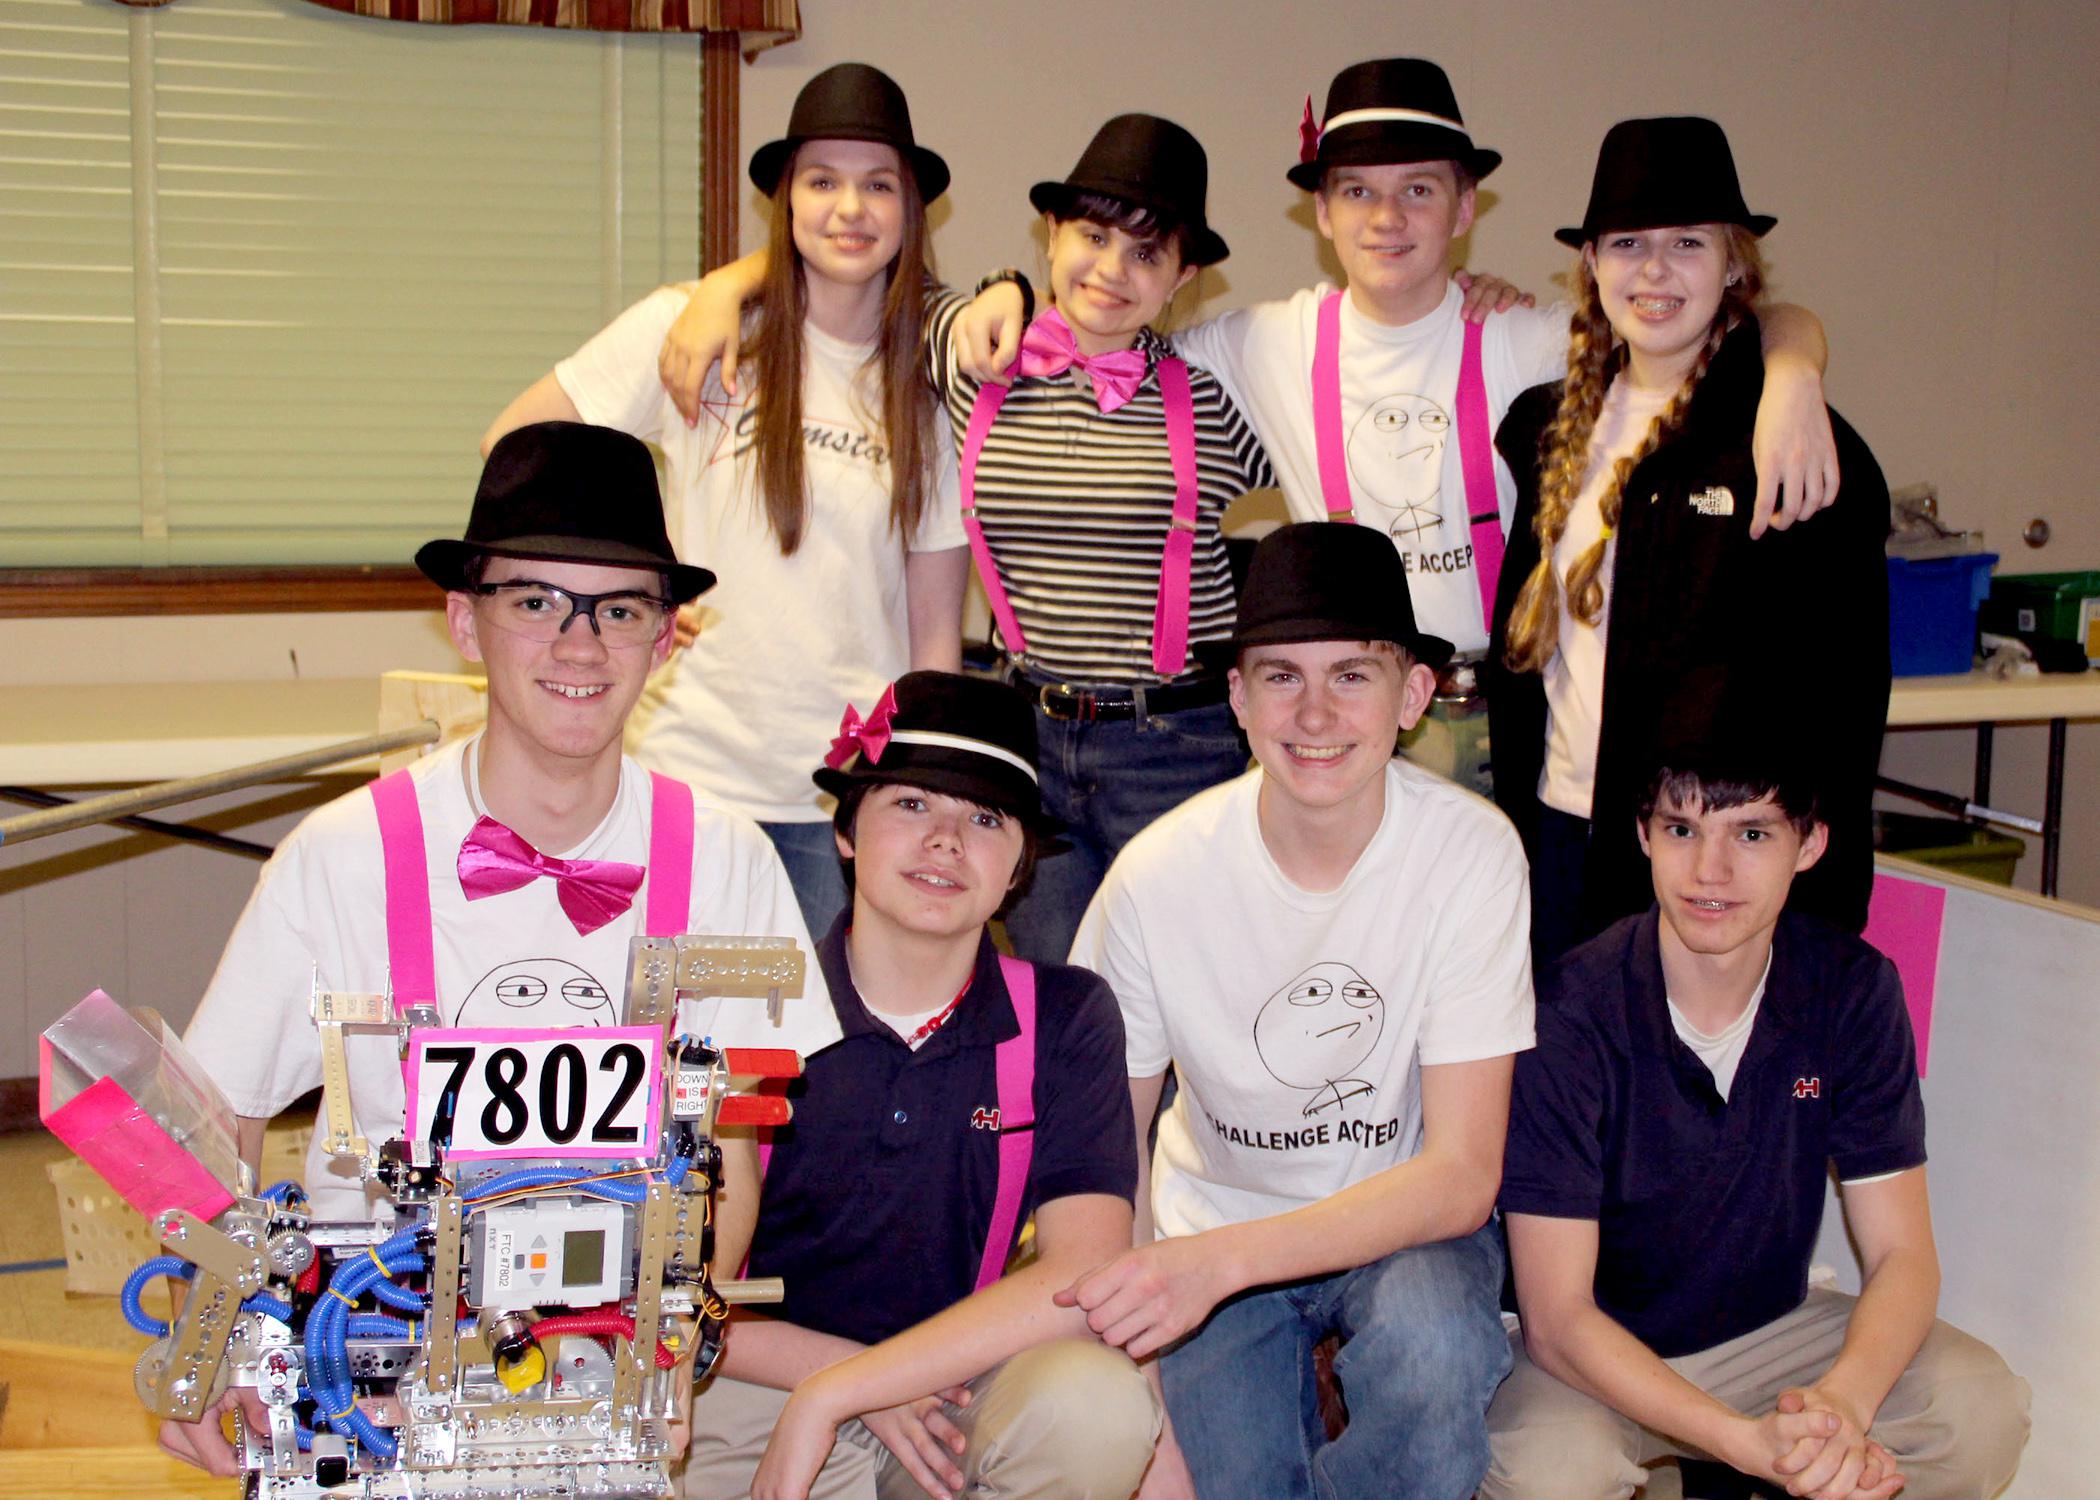 The "Challenge Accepted" robotics team celebrates winning the Feb. 7-8, 2014, state competition in Oxford, Miss. They include (front row, from left) Nathan Rodgers (holding Geoff the robot), Cade Holliday, Will Gaines and Chandler Holliday, and (back row, from left) Jill Gautier, Skyler Smith, Jon Rodgers and Paige Gautier. (Submitted Photo)